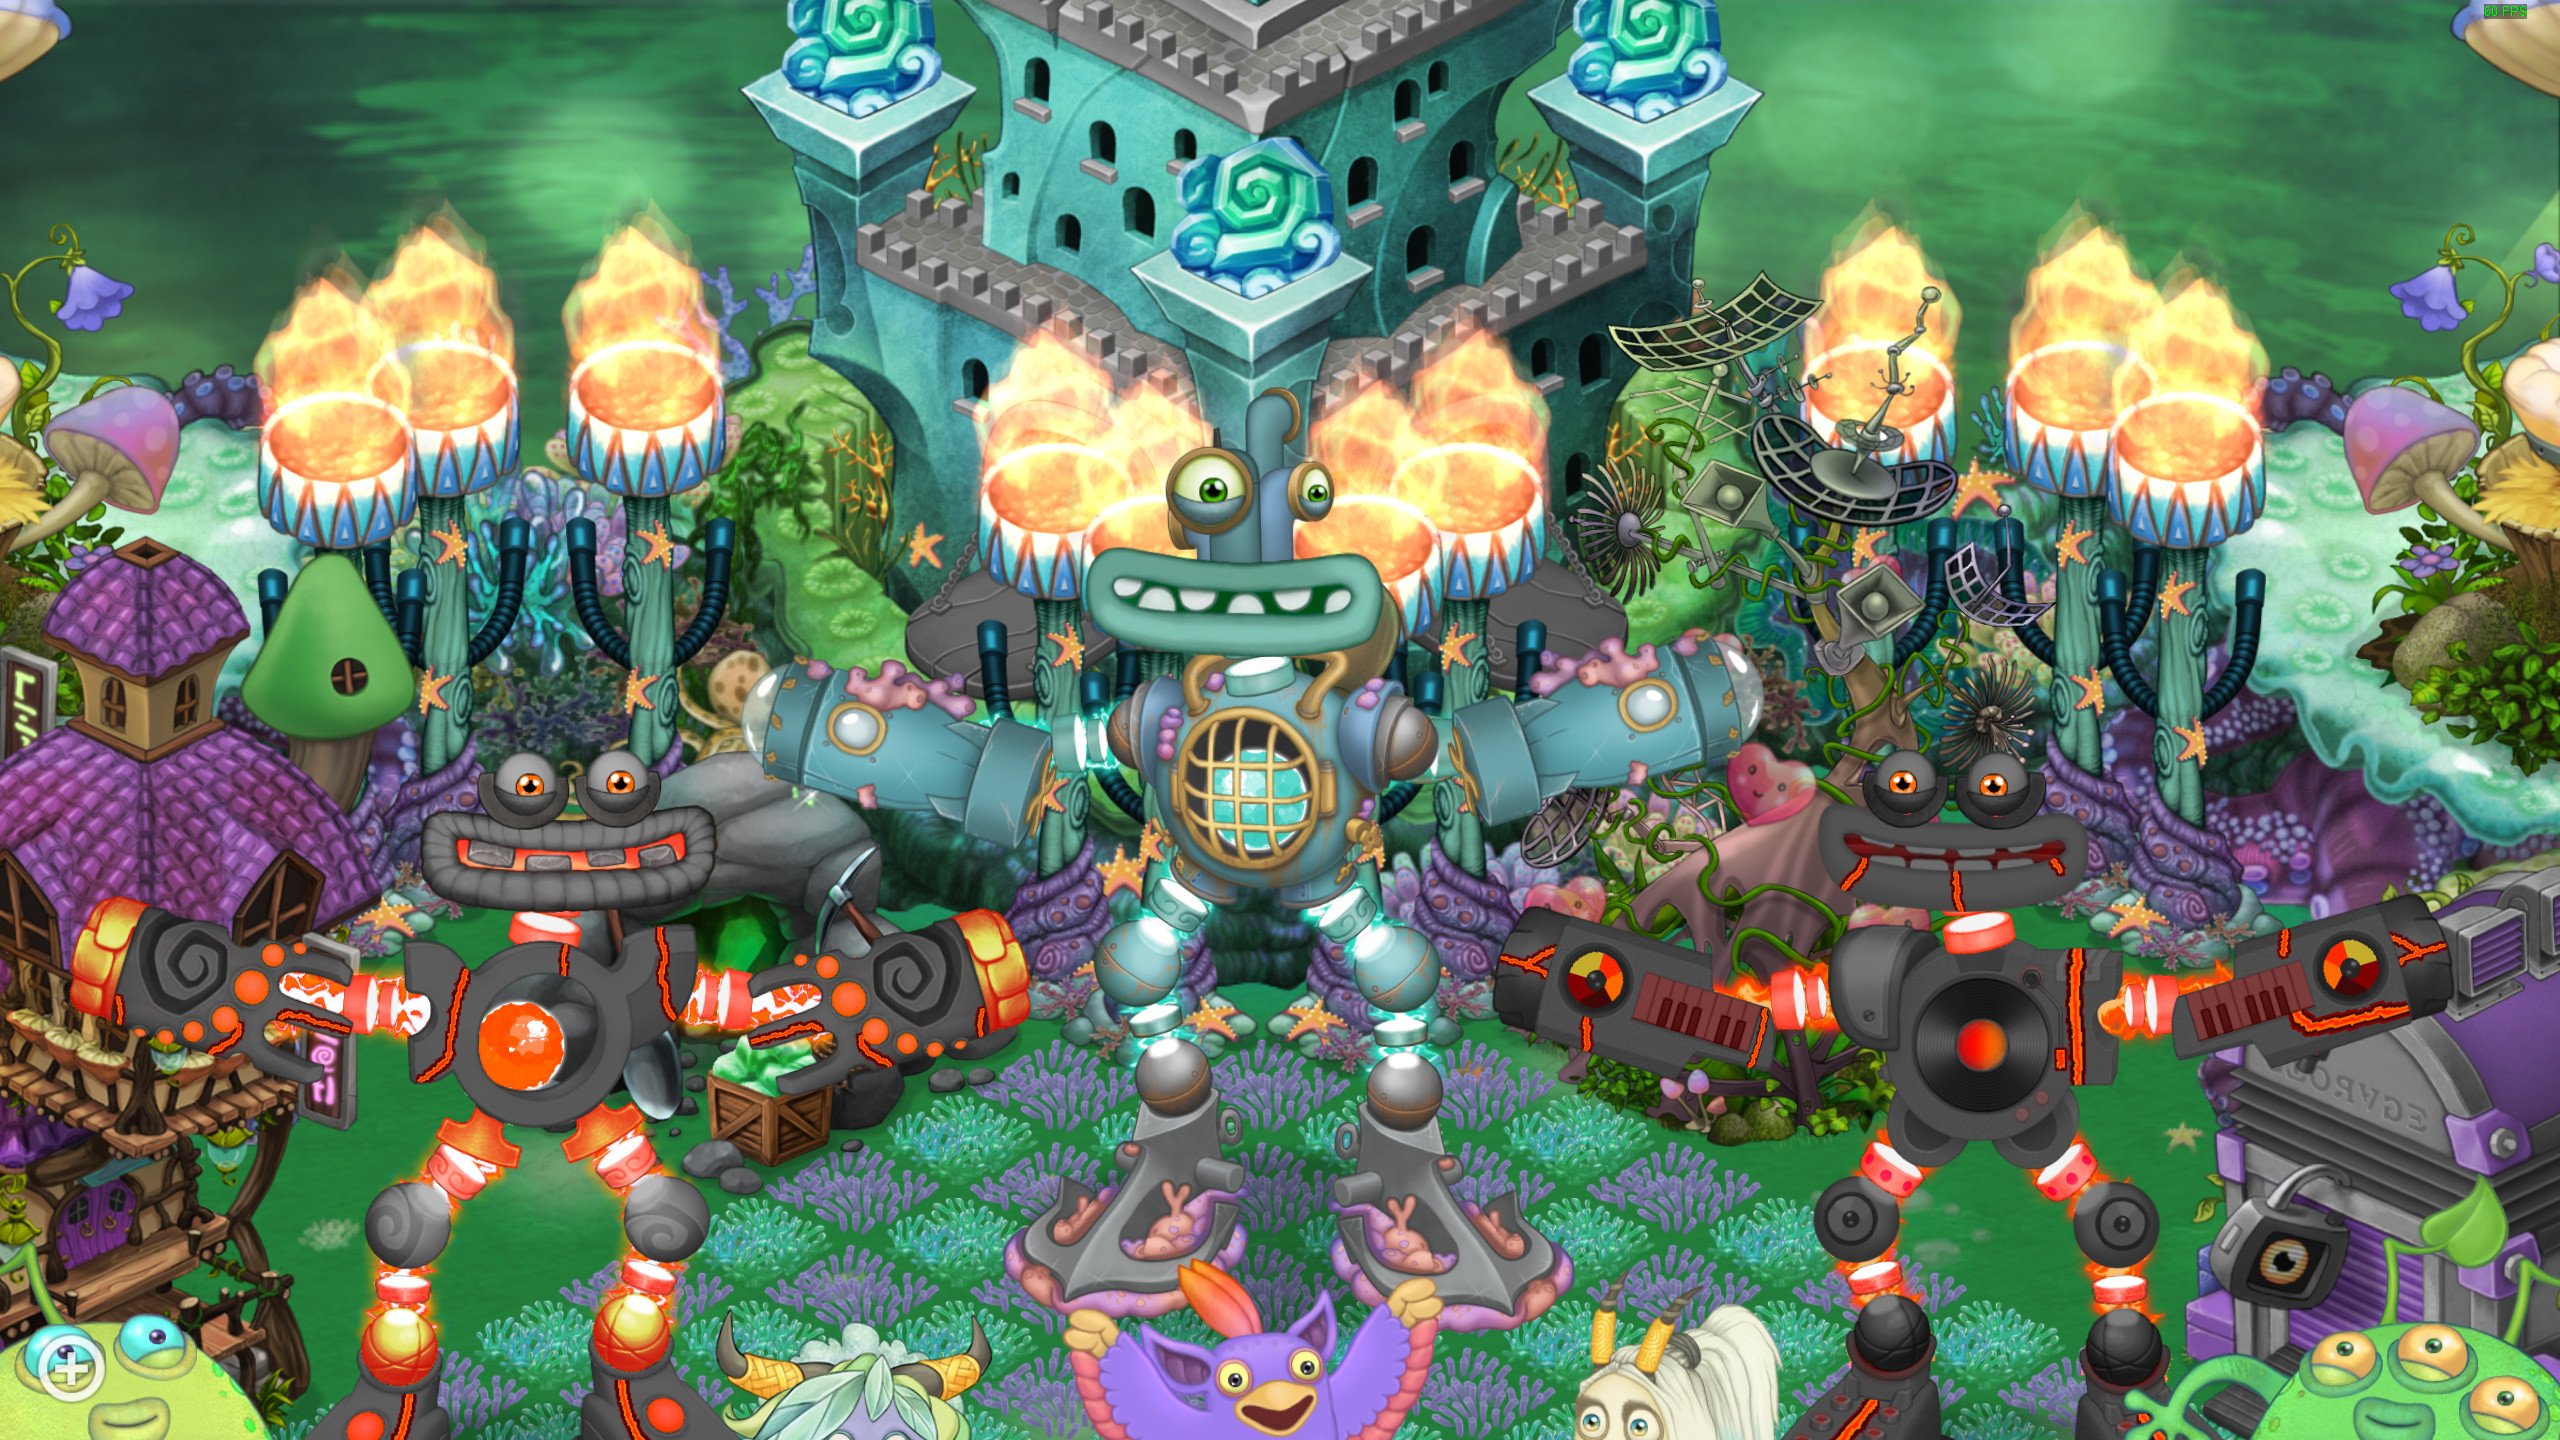 Ethereal Epic Wubbox [My Singing Monsters] [Mods]